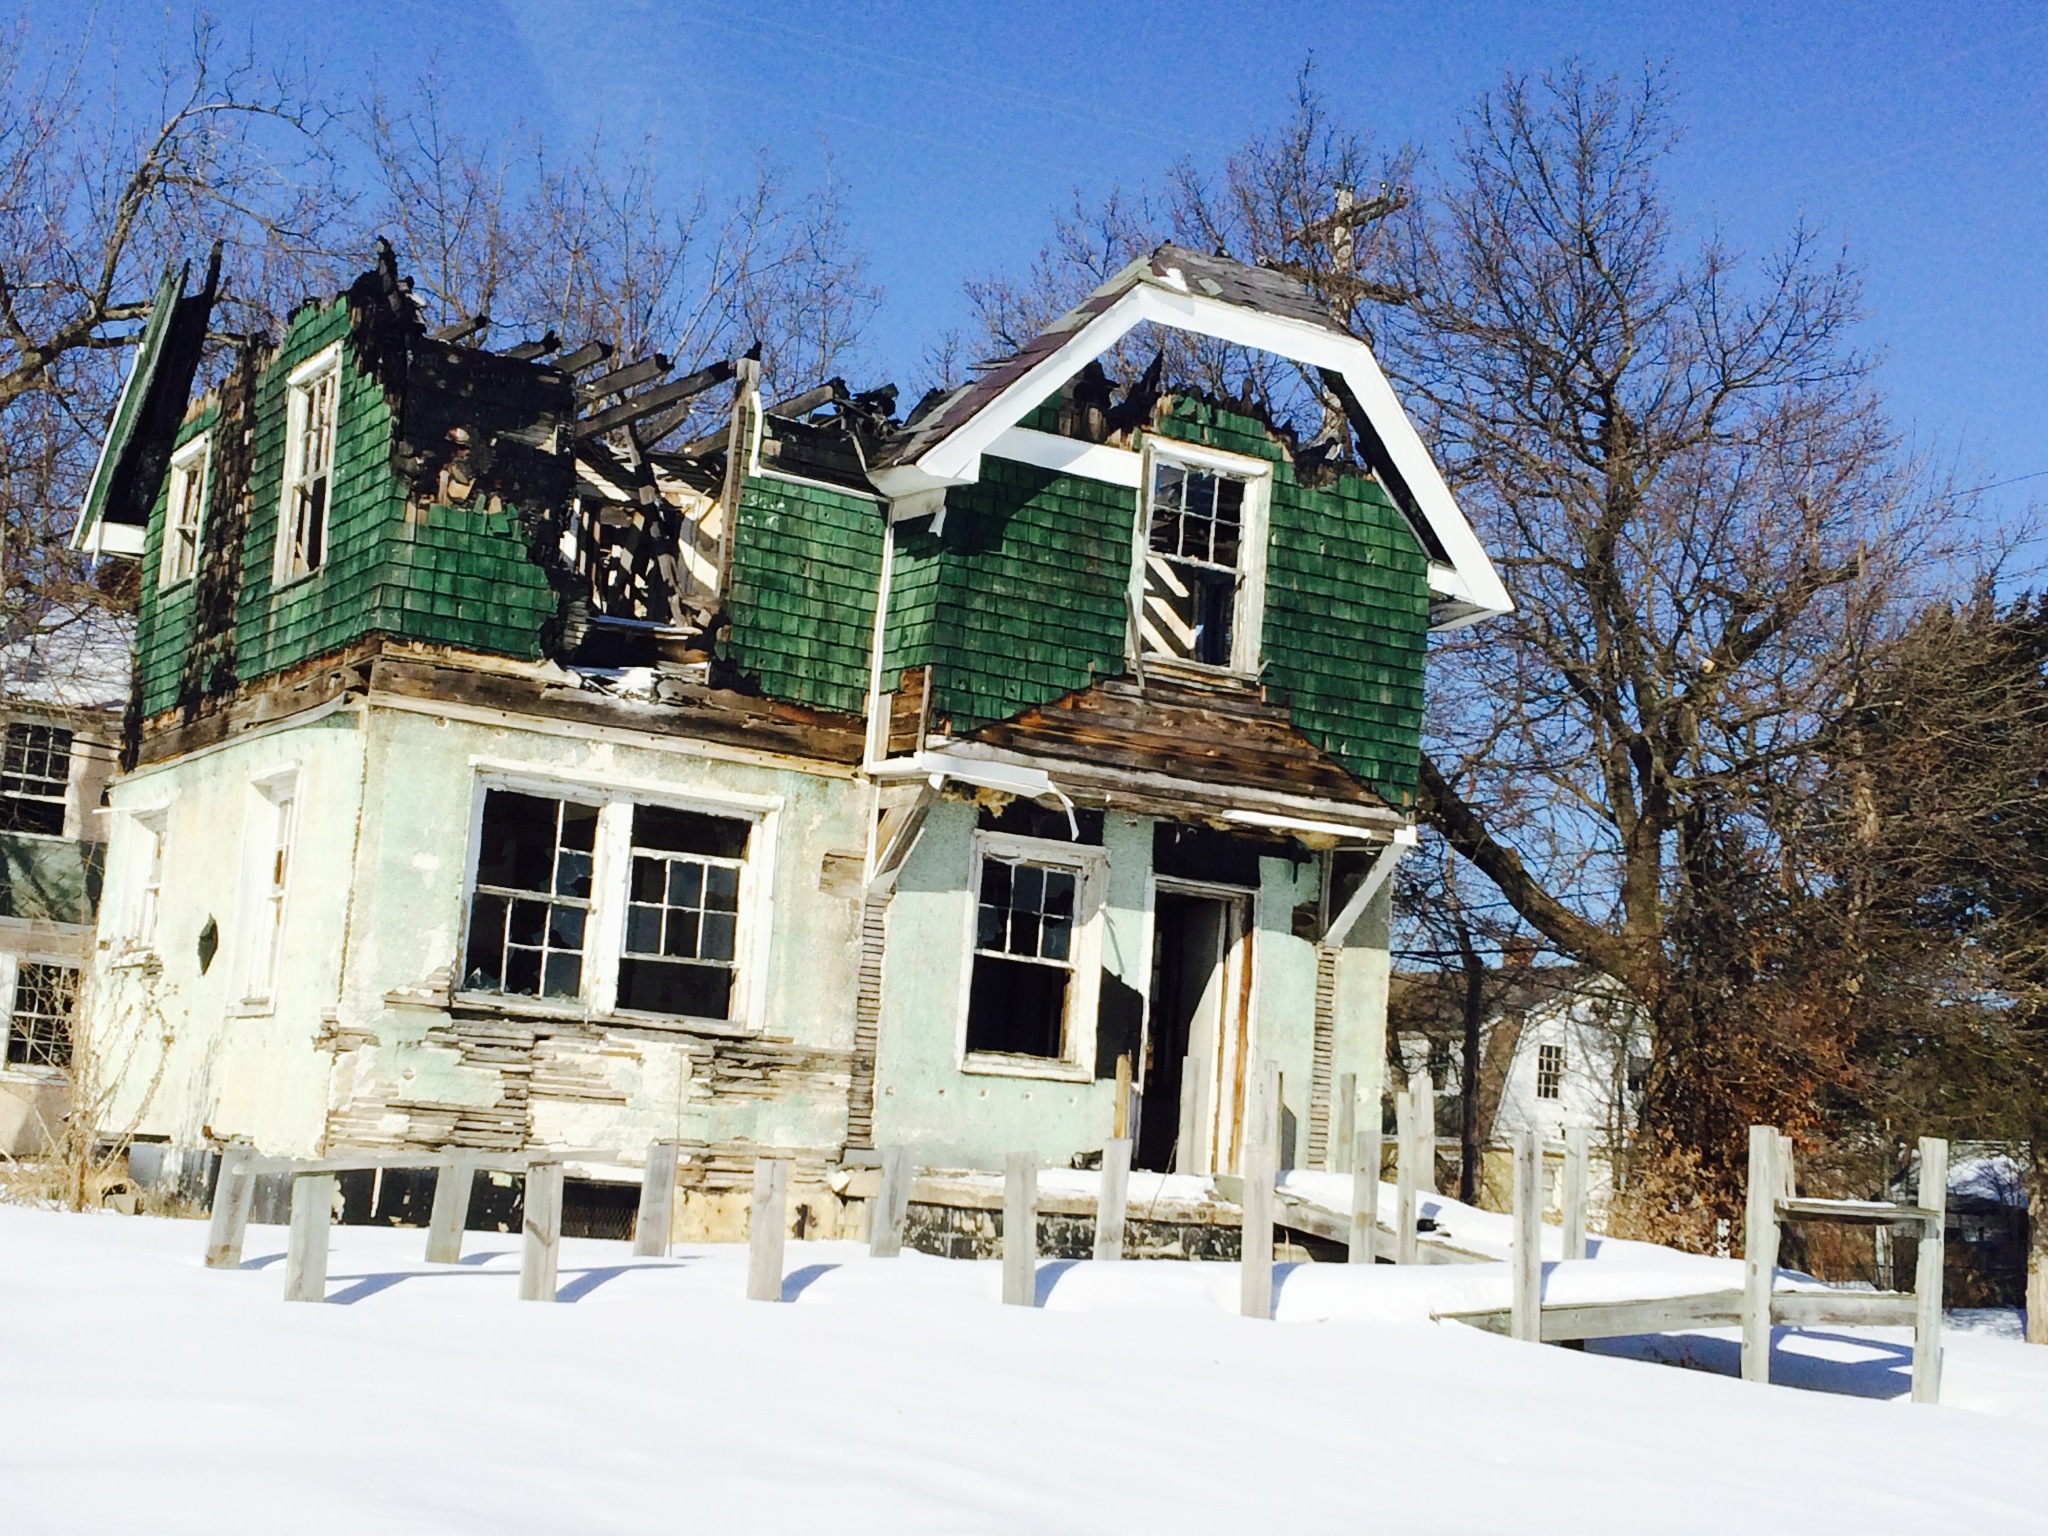 Blighted, Abandoned Home in Flint